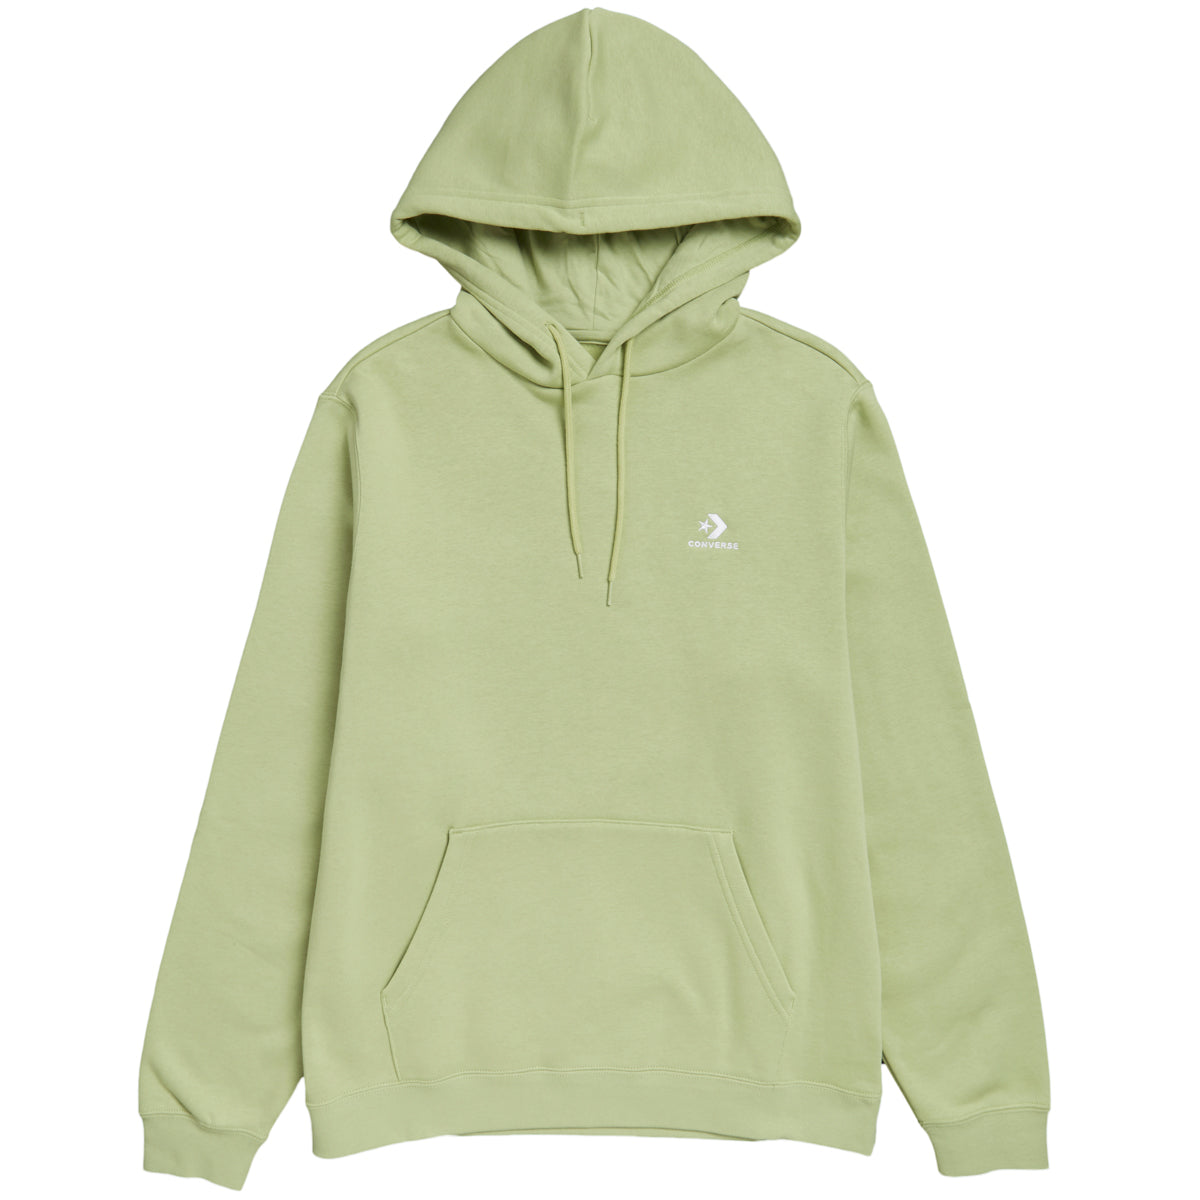 Converse Go-to Embroidered Star Chevron Hoodie - Vitality Green image 1